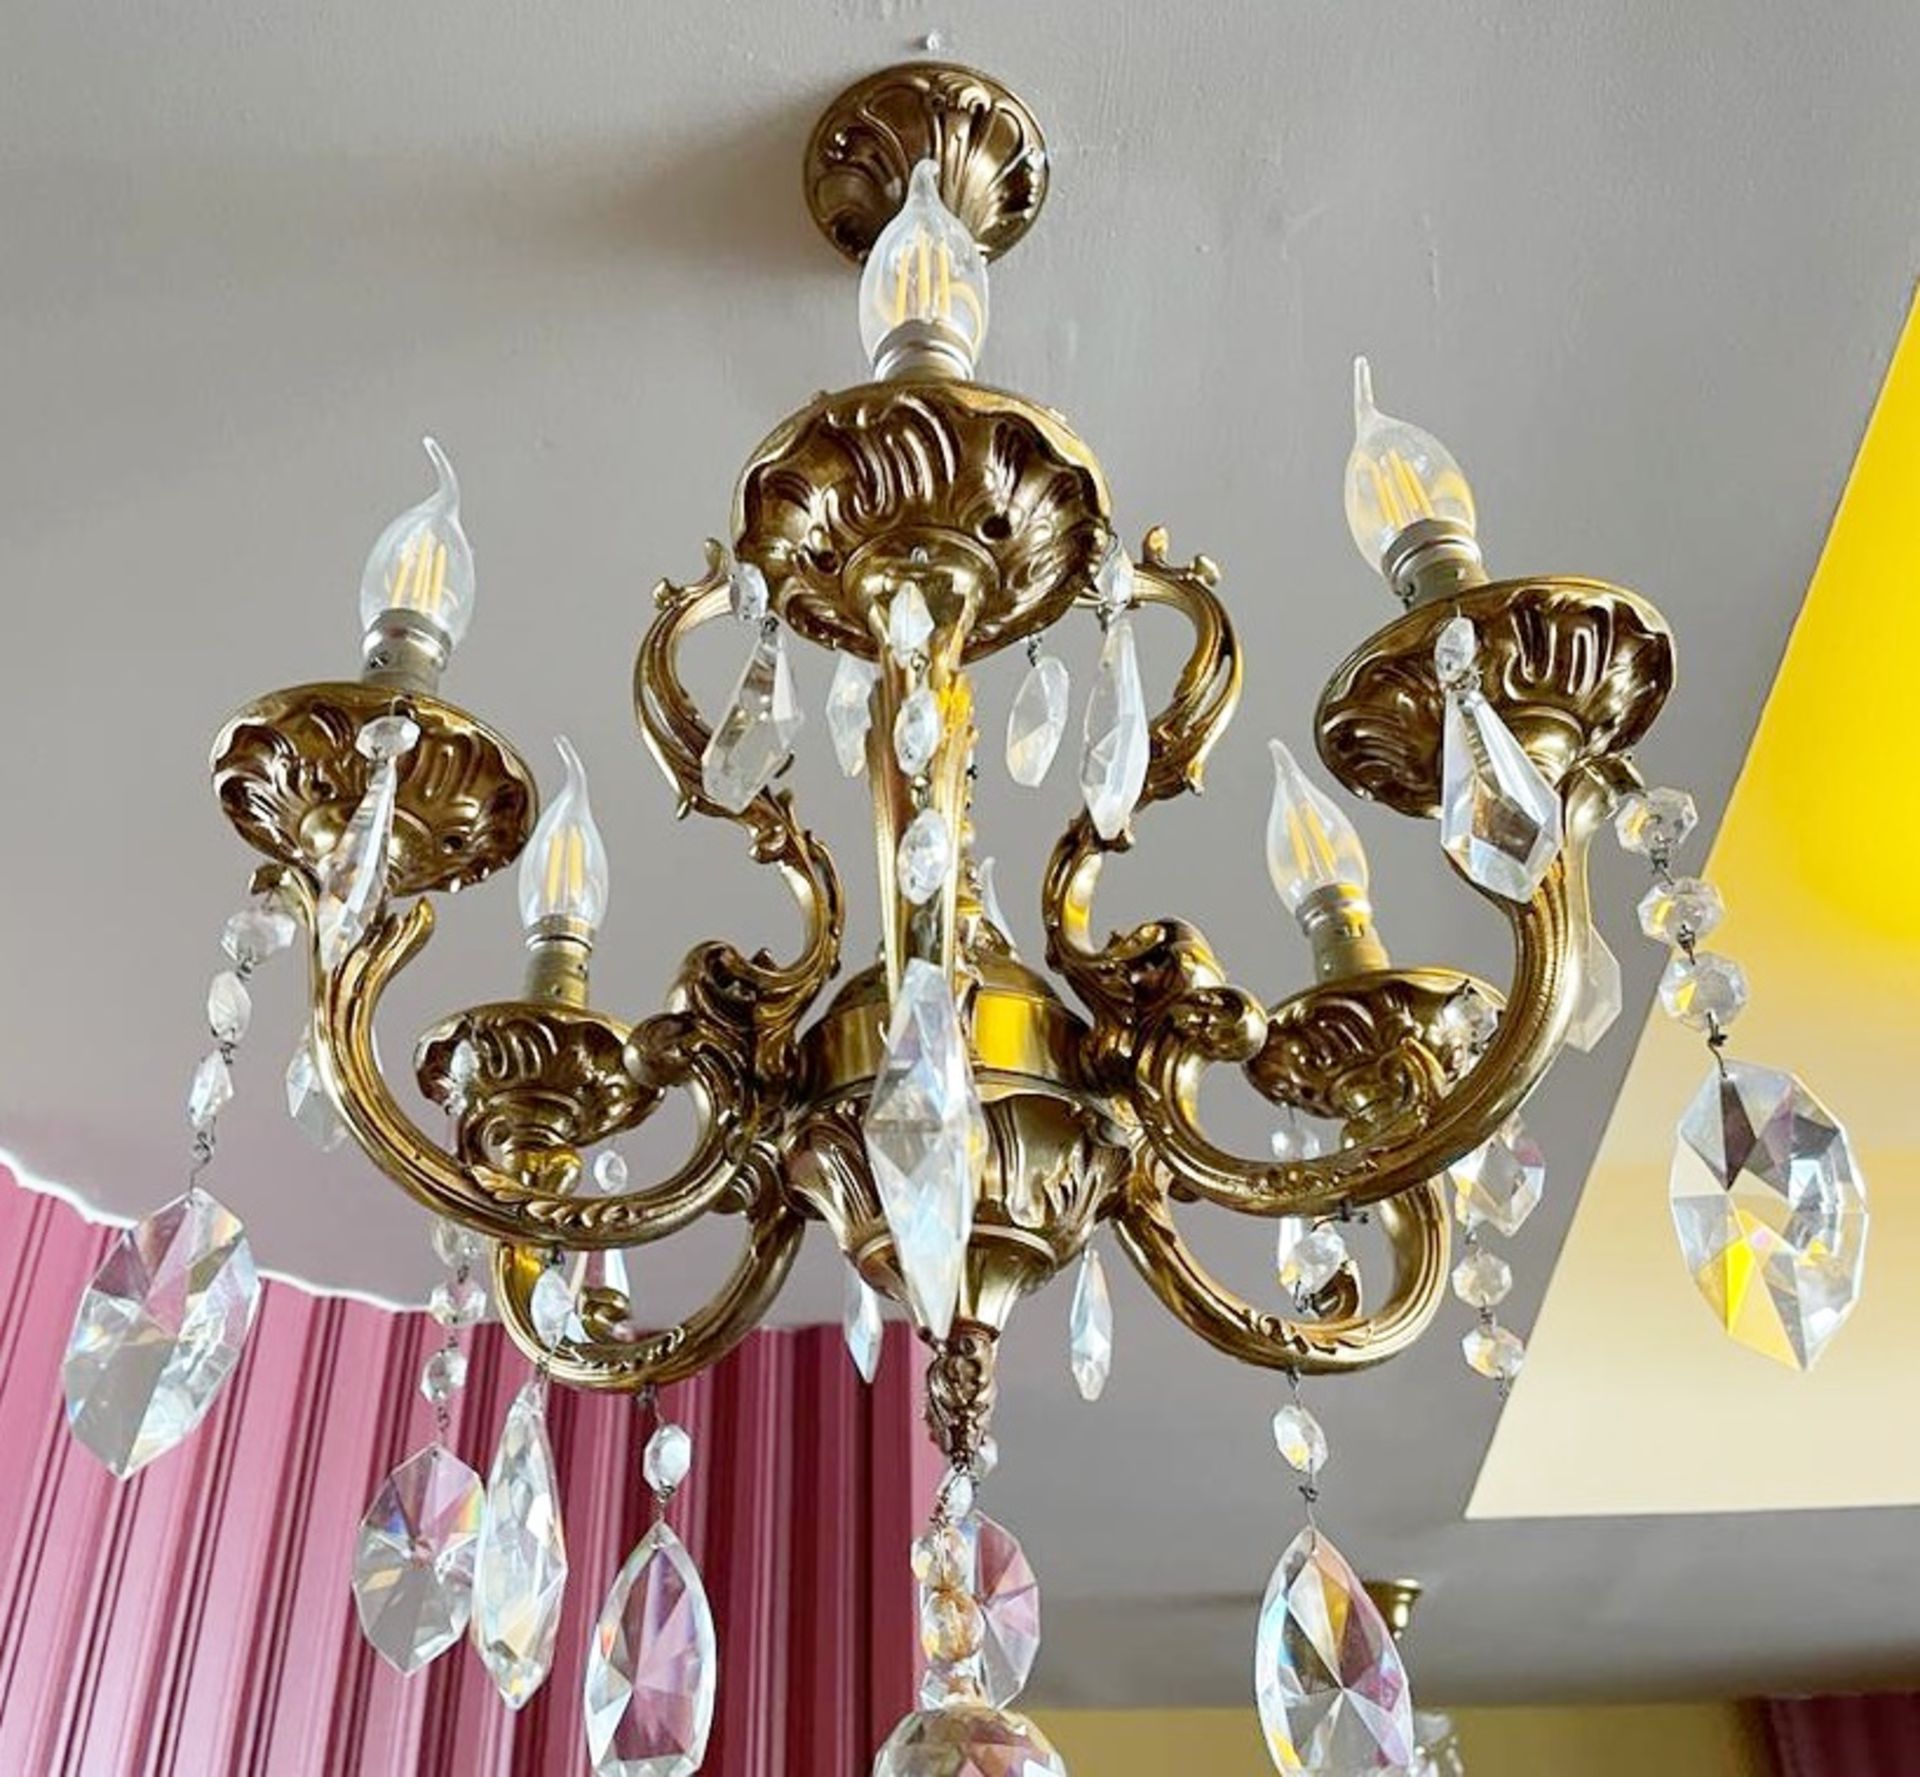 1 x Chandelier With Six Candle Lights - Ref: BK149 - CL686 - Location: Altrincham WA14This lot was